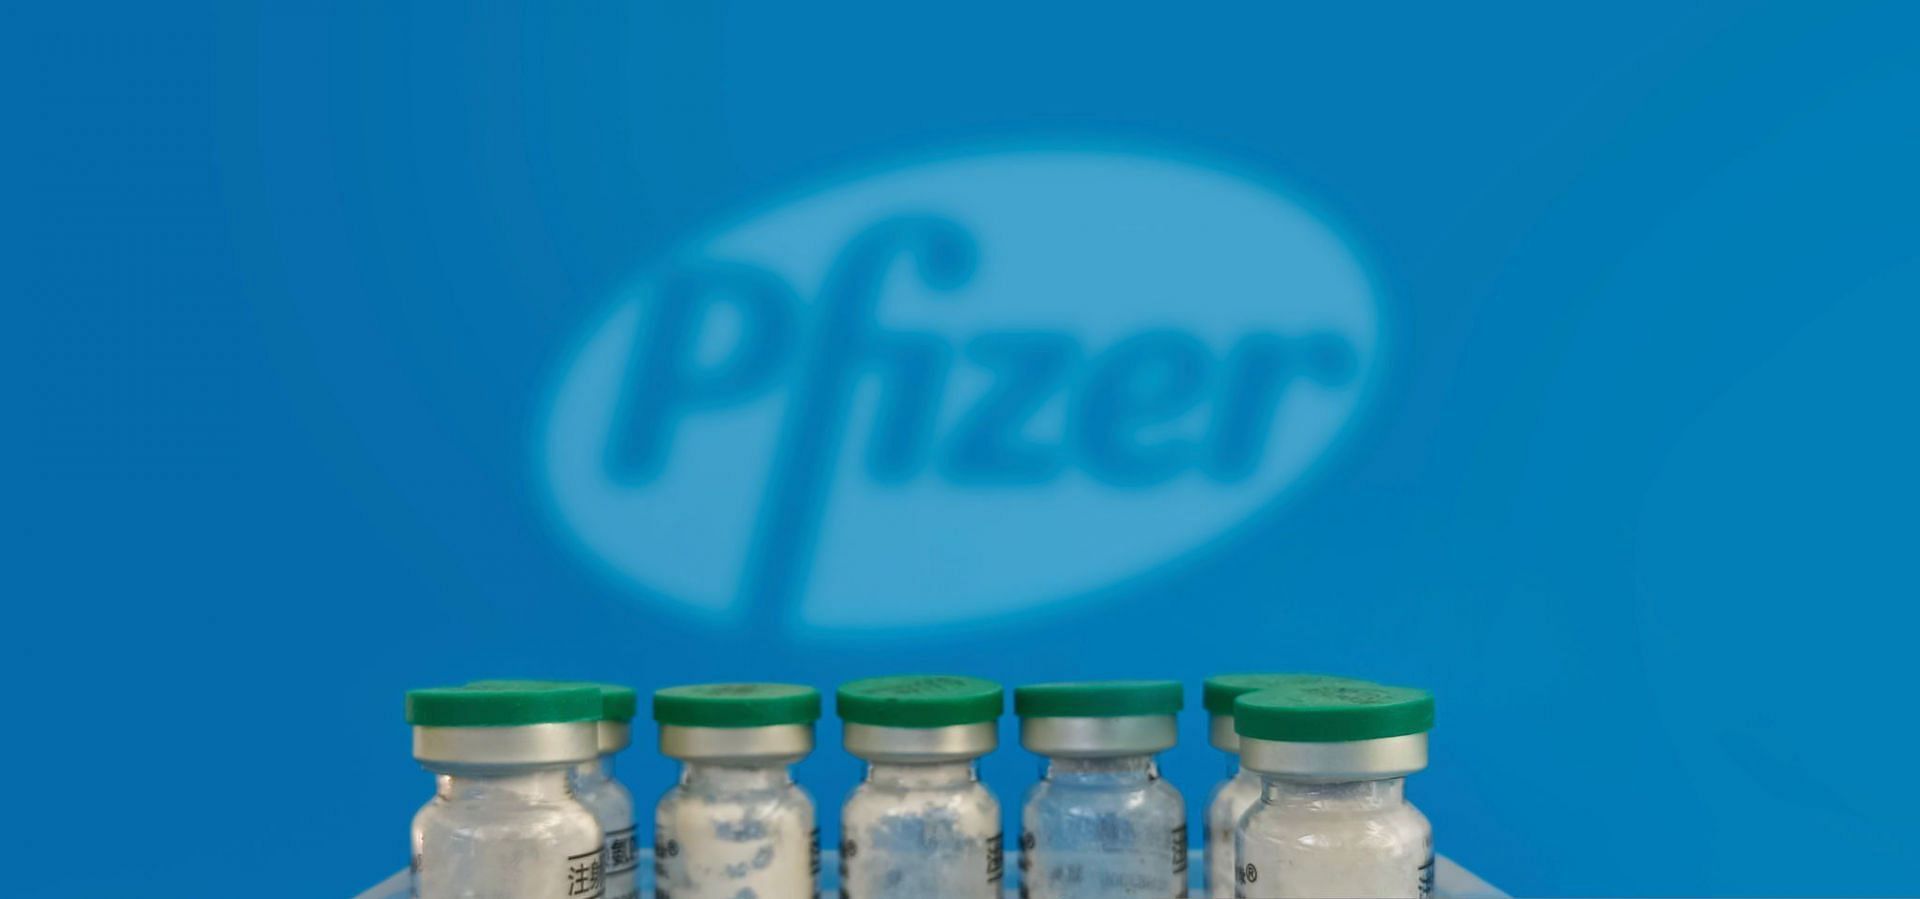 Pfizer Grammy connection and Martha Stewart ad left netizens divided (Image via Getty Images)